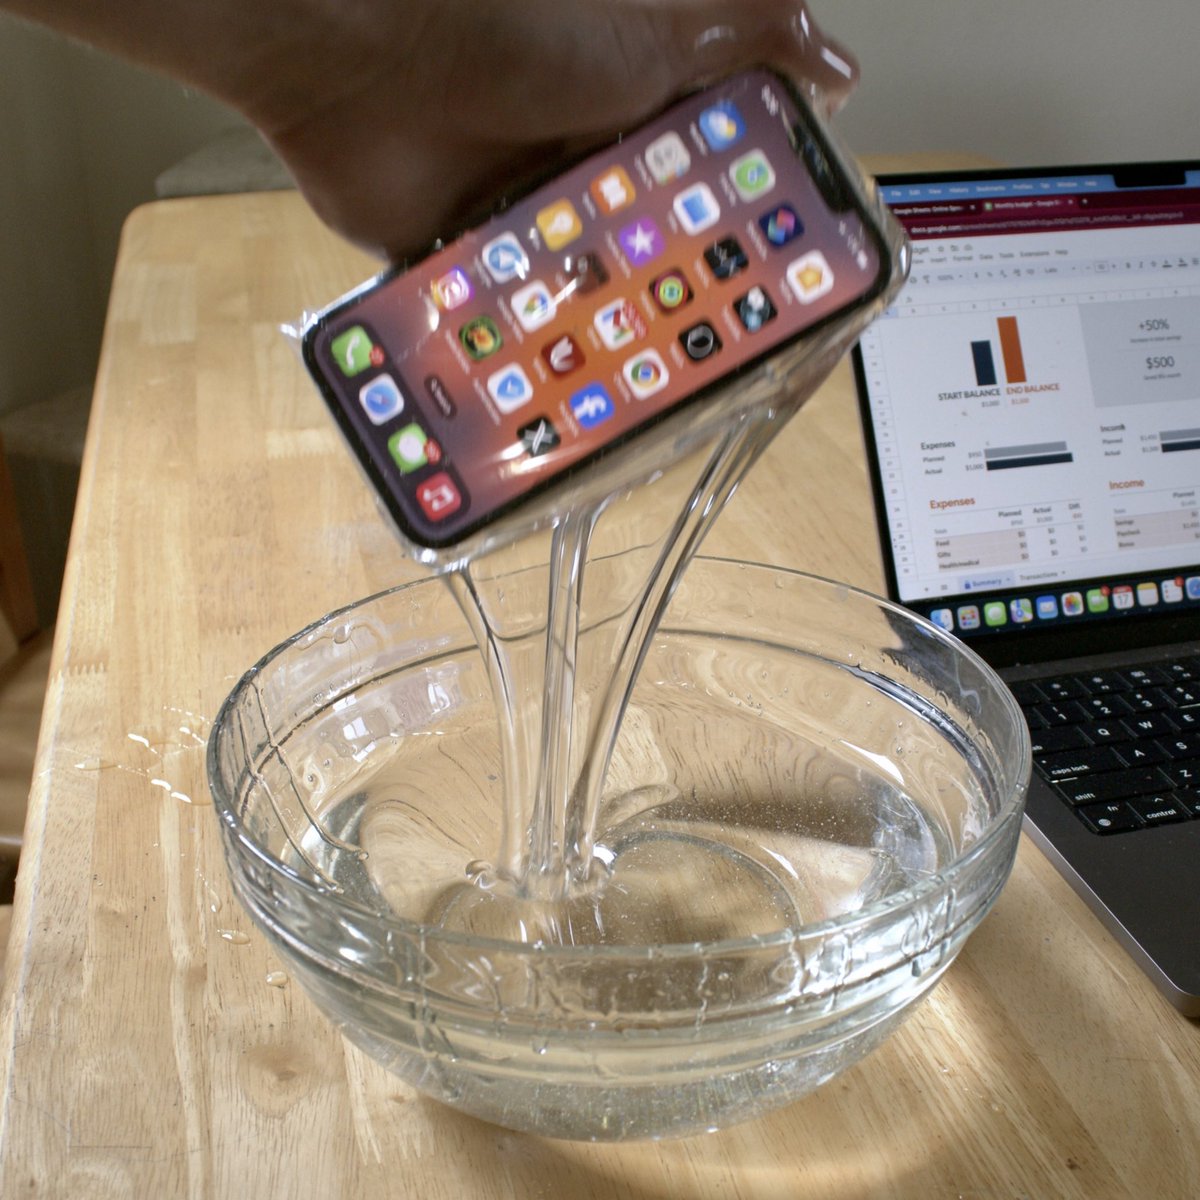 Productivity hack: Phone in syrup. When I’m working, I put my phone in a bowl of corn syrup. Trying to take it out is so messy and gross that it creates a sensory aversion stronger than my desire to check it. (You can use any syrup)